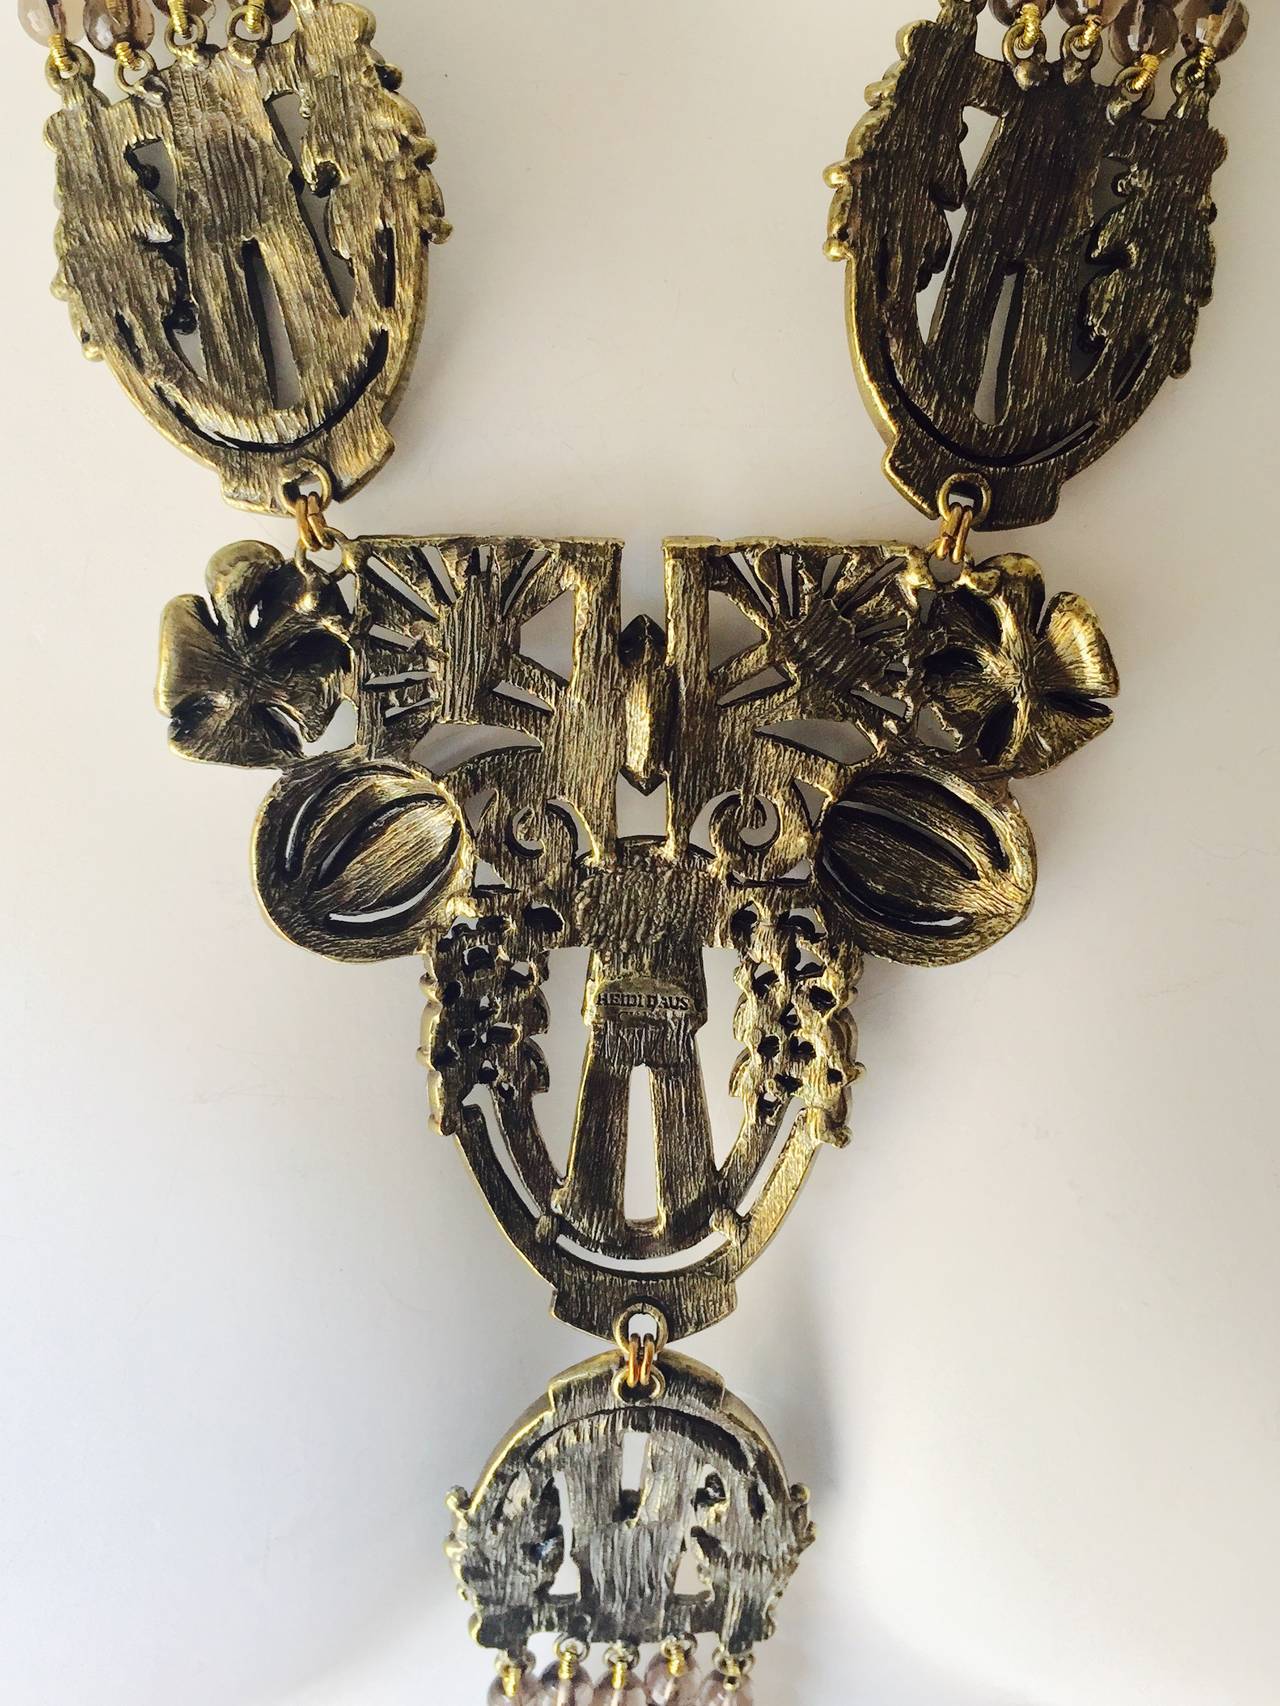 Ornate Heidi Daus Estate Necklace In Excellent Condition For Sale In Palm Beach, FL